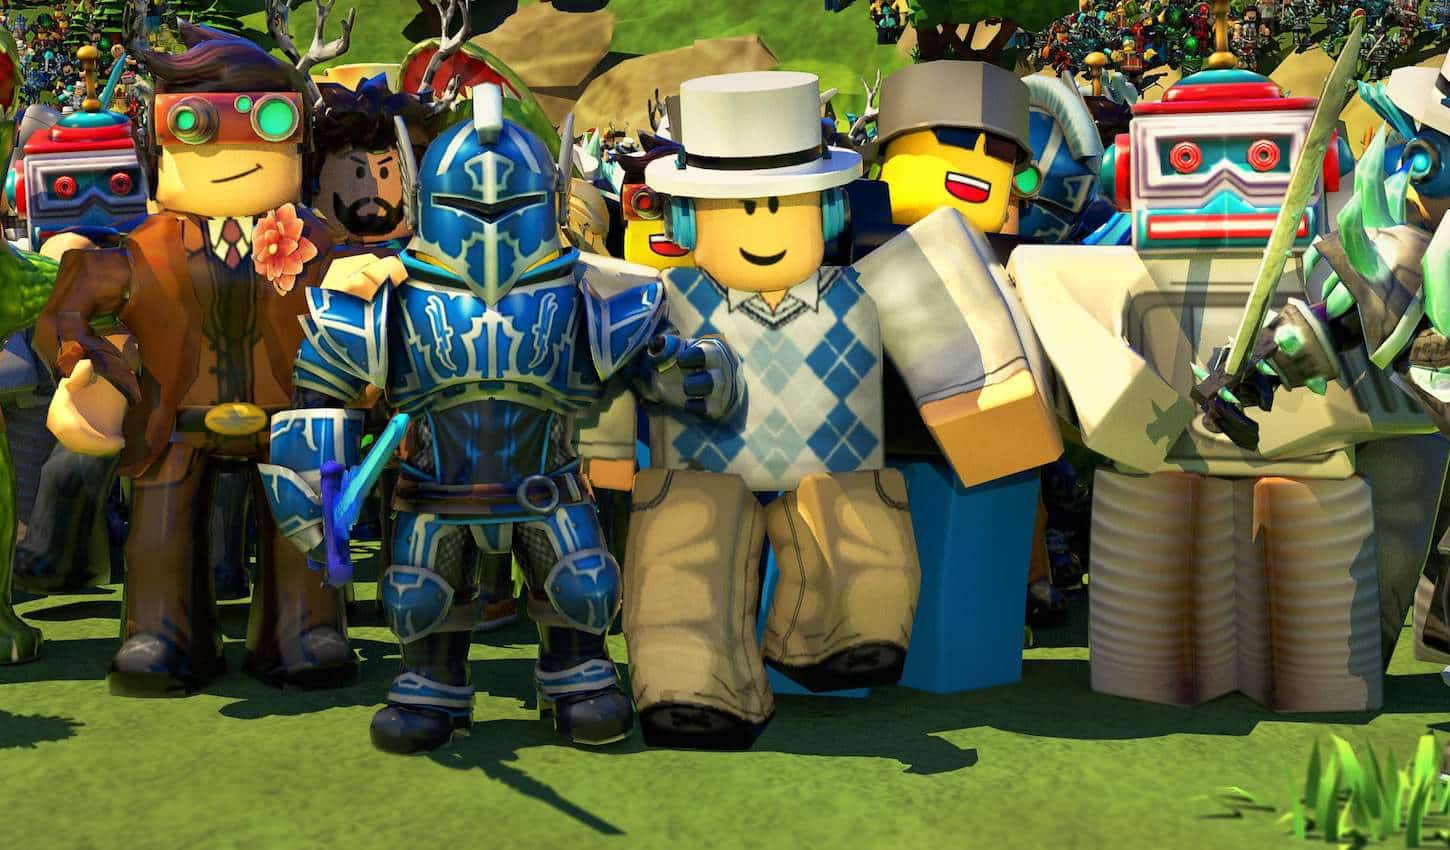 roblox ipo 2020